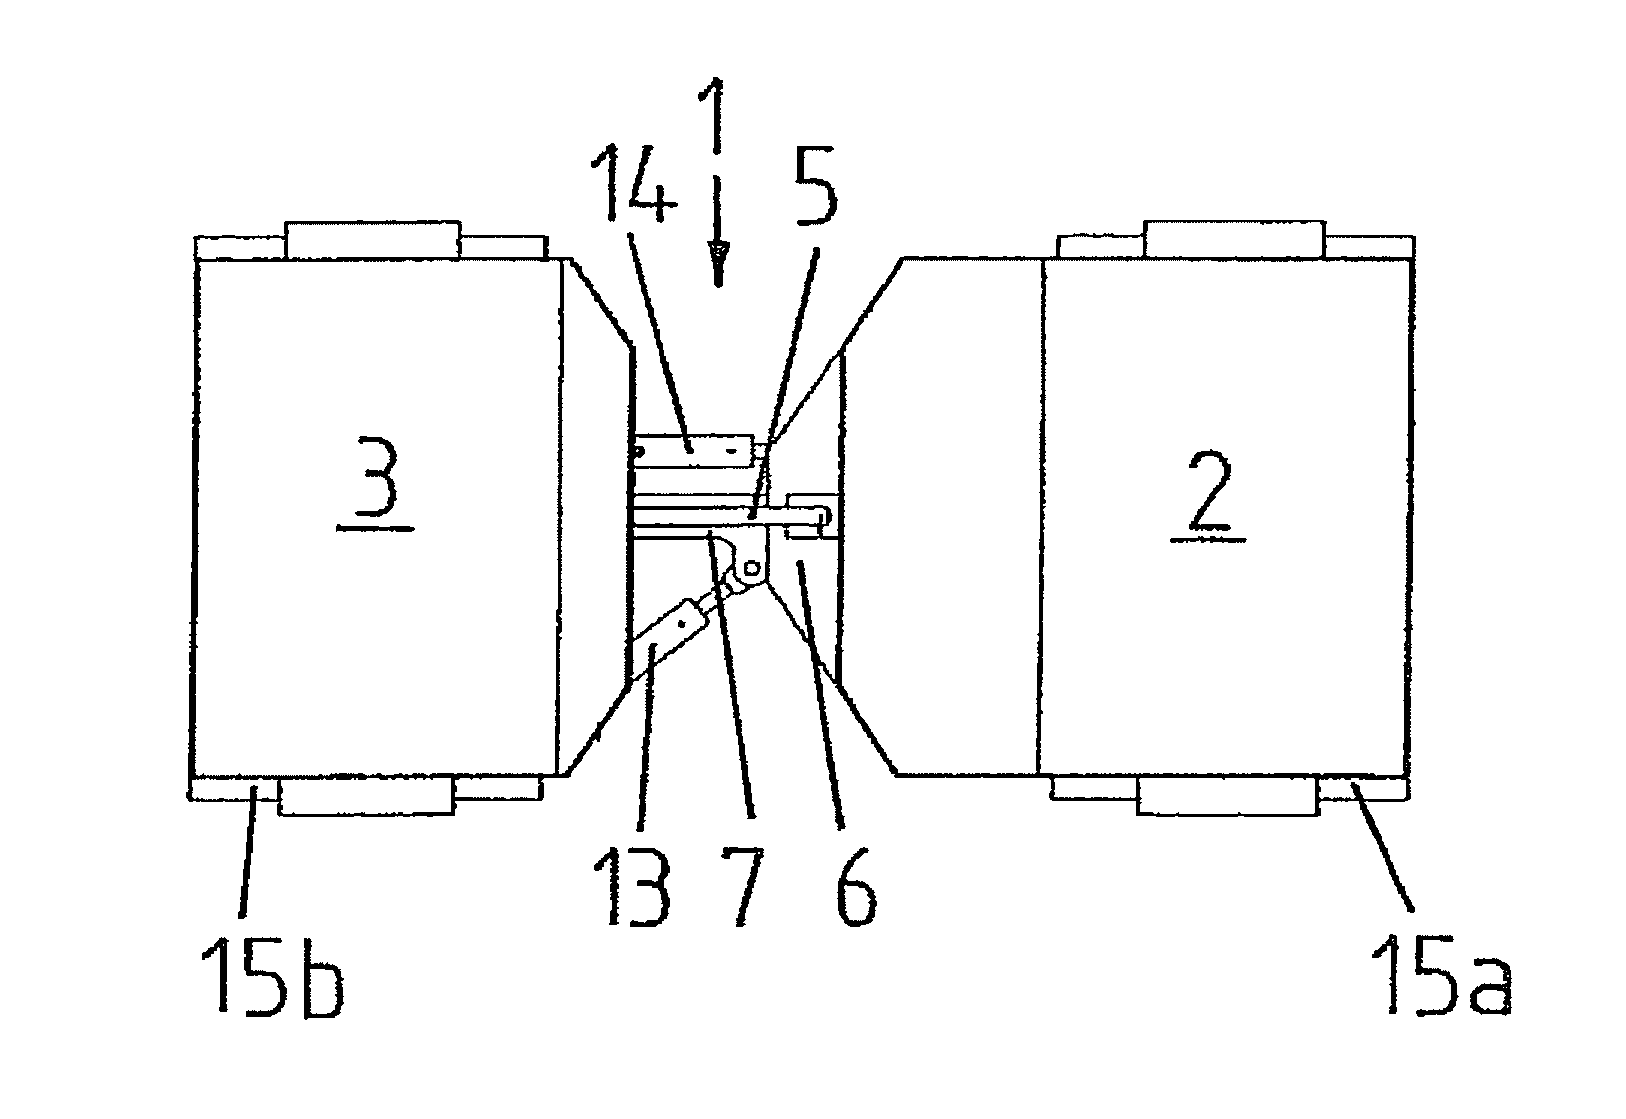 Hinge assembly for connecting two vehicle parts to a vehicle with articulated frame steering